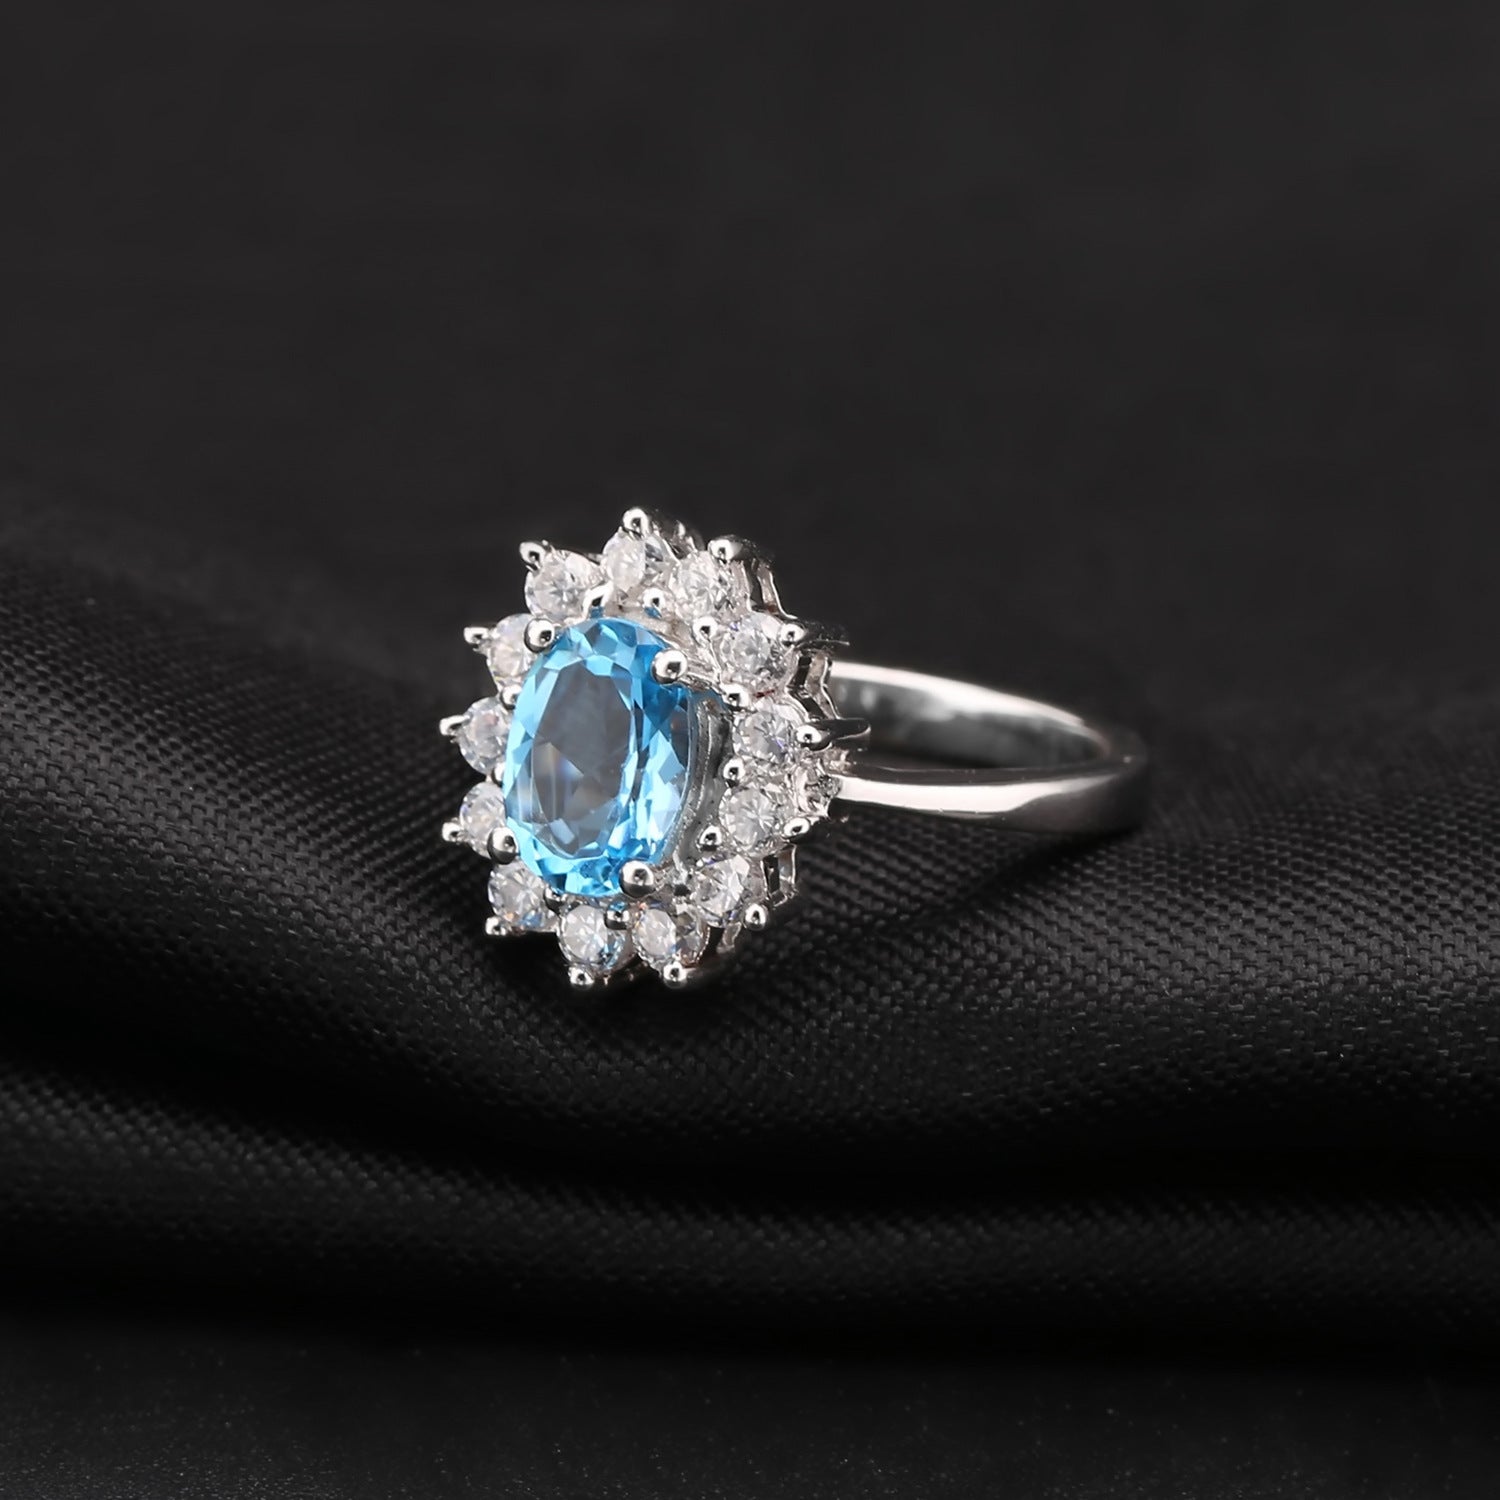 Blue Topaz Halo Ring - HERS